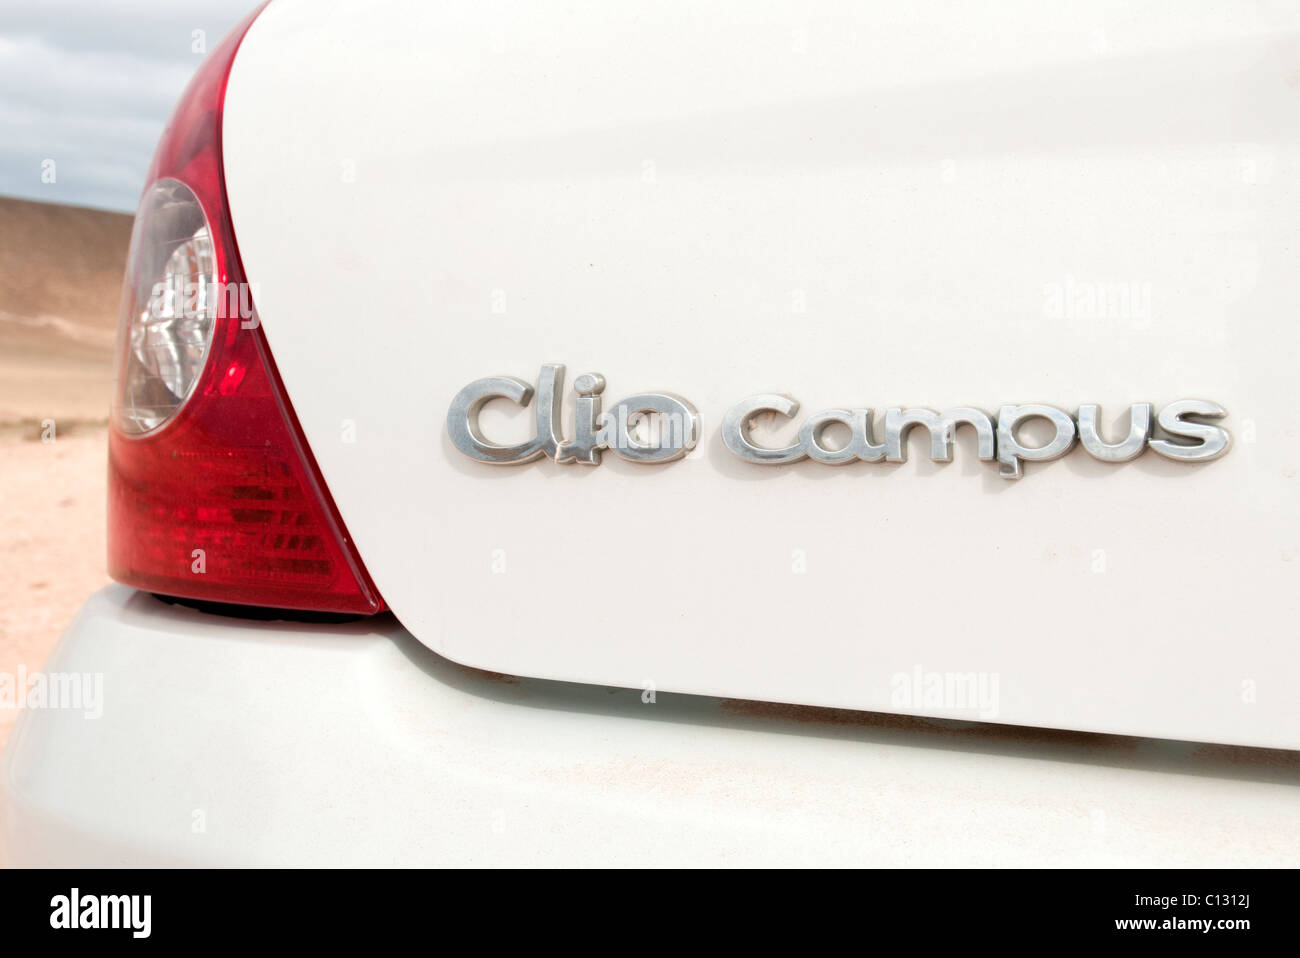 Authorities believe this Renault Clio Campus was struck by a